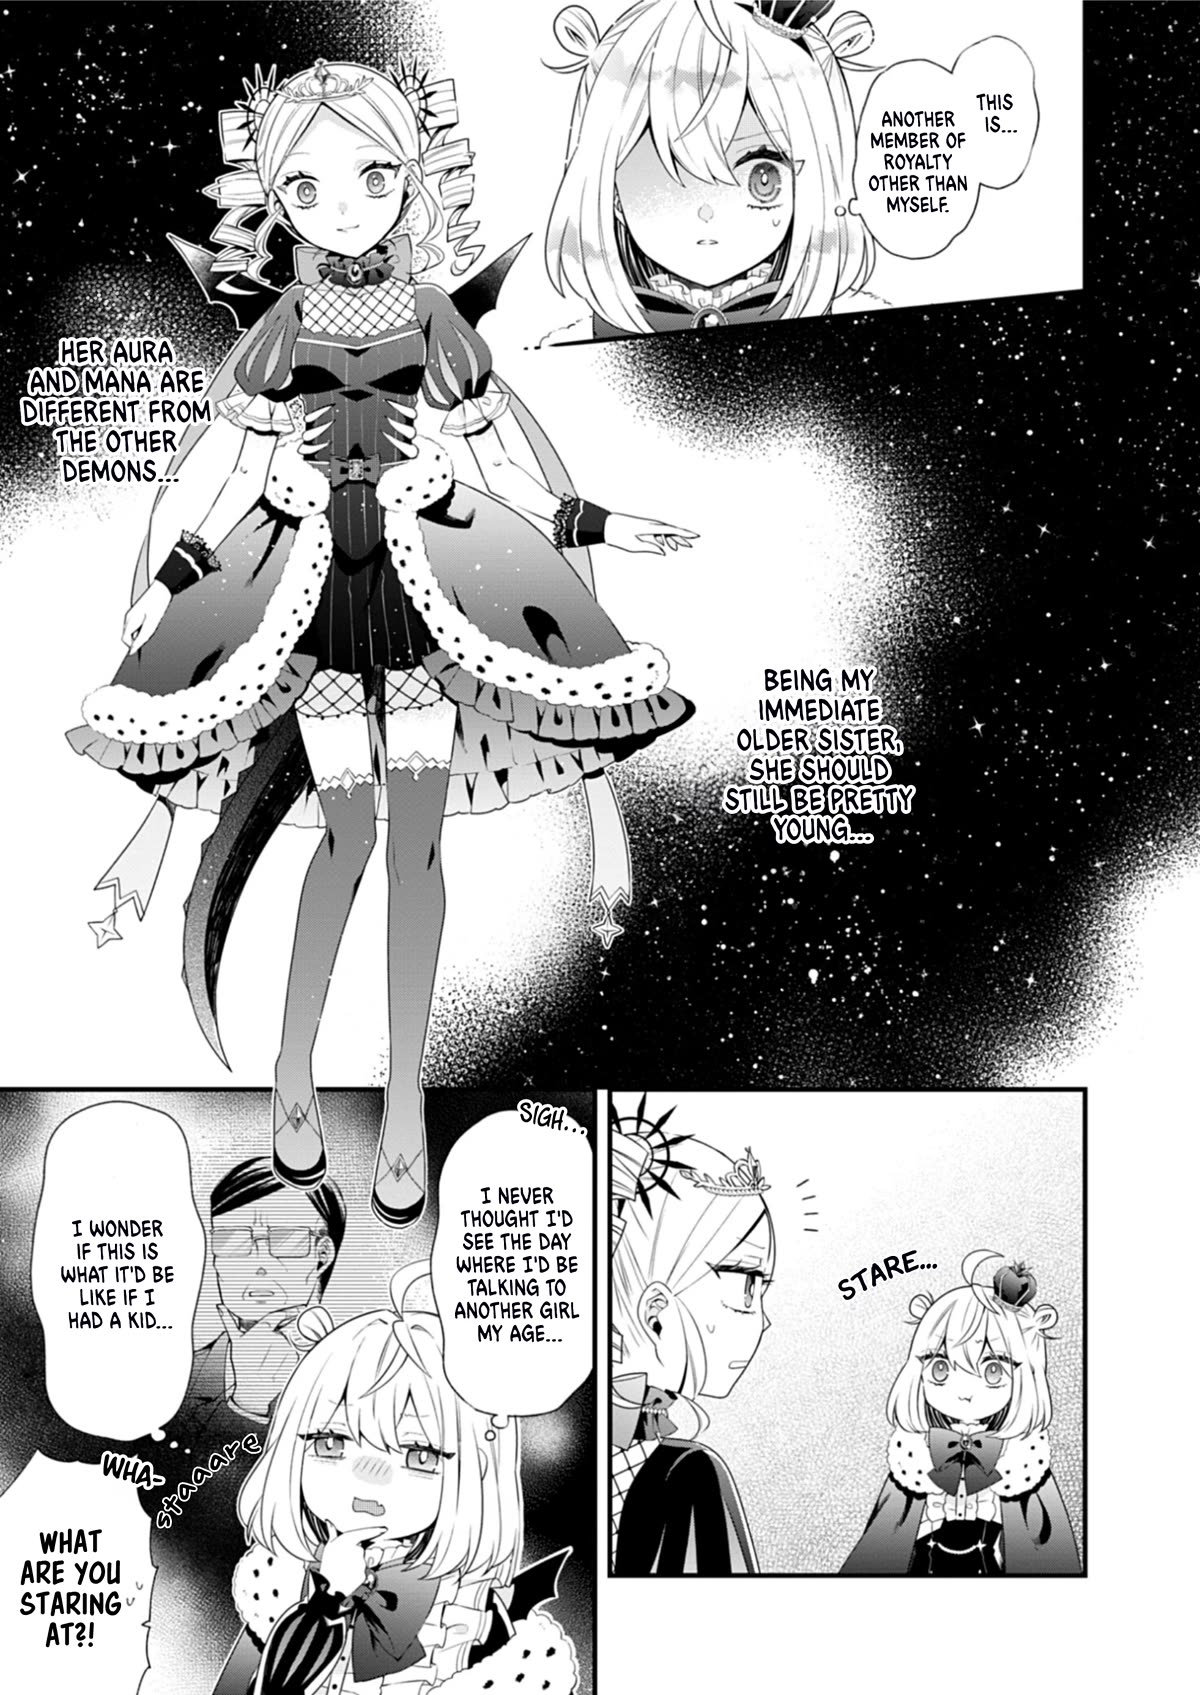 The Old Man That Was Reincarnated as a Young Girl in the Demon World Wants to Become the Demon Lord for the Sake of Peace - chapter 5 - #5